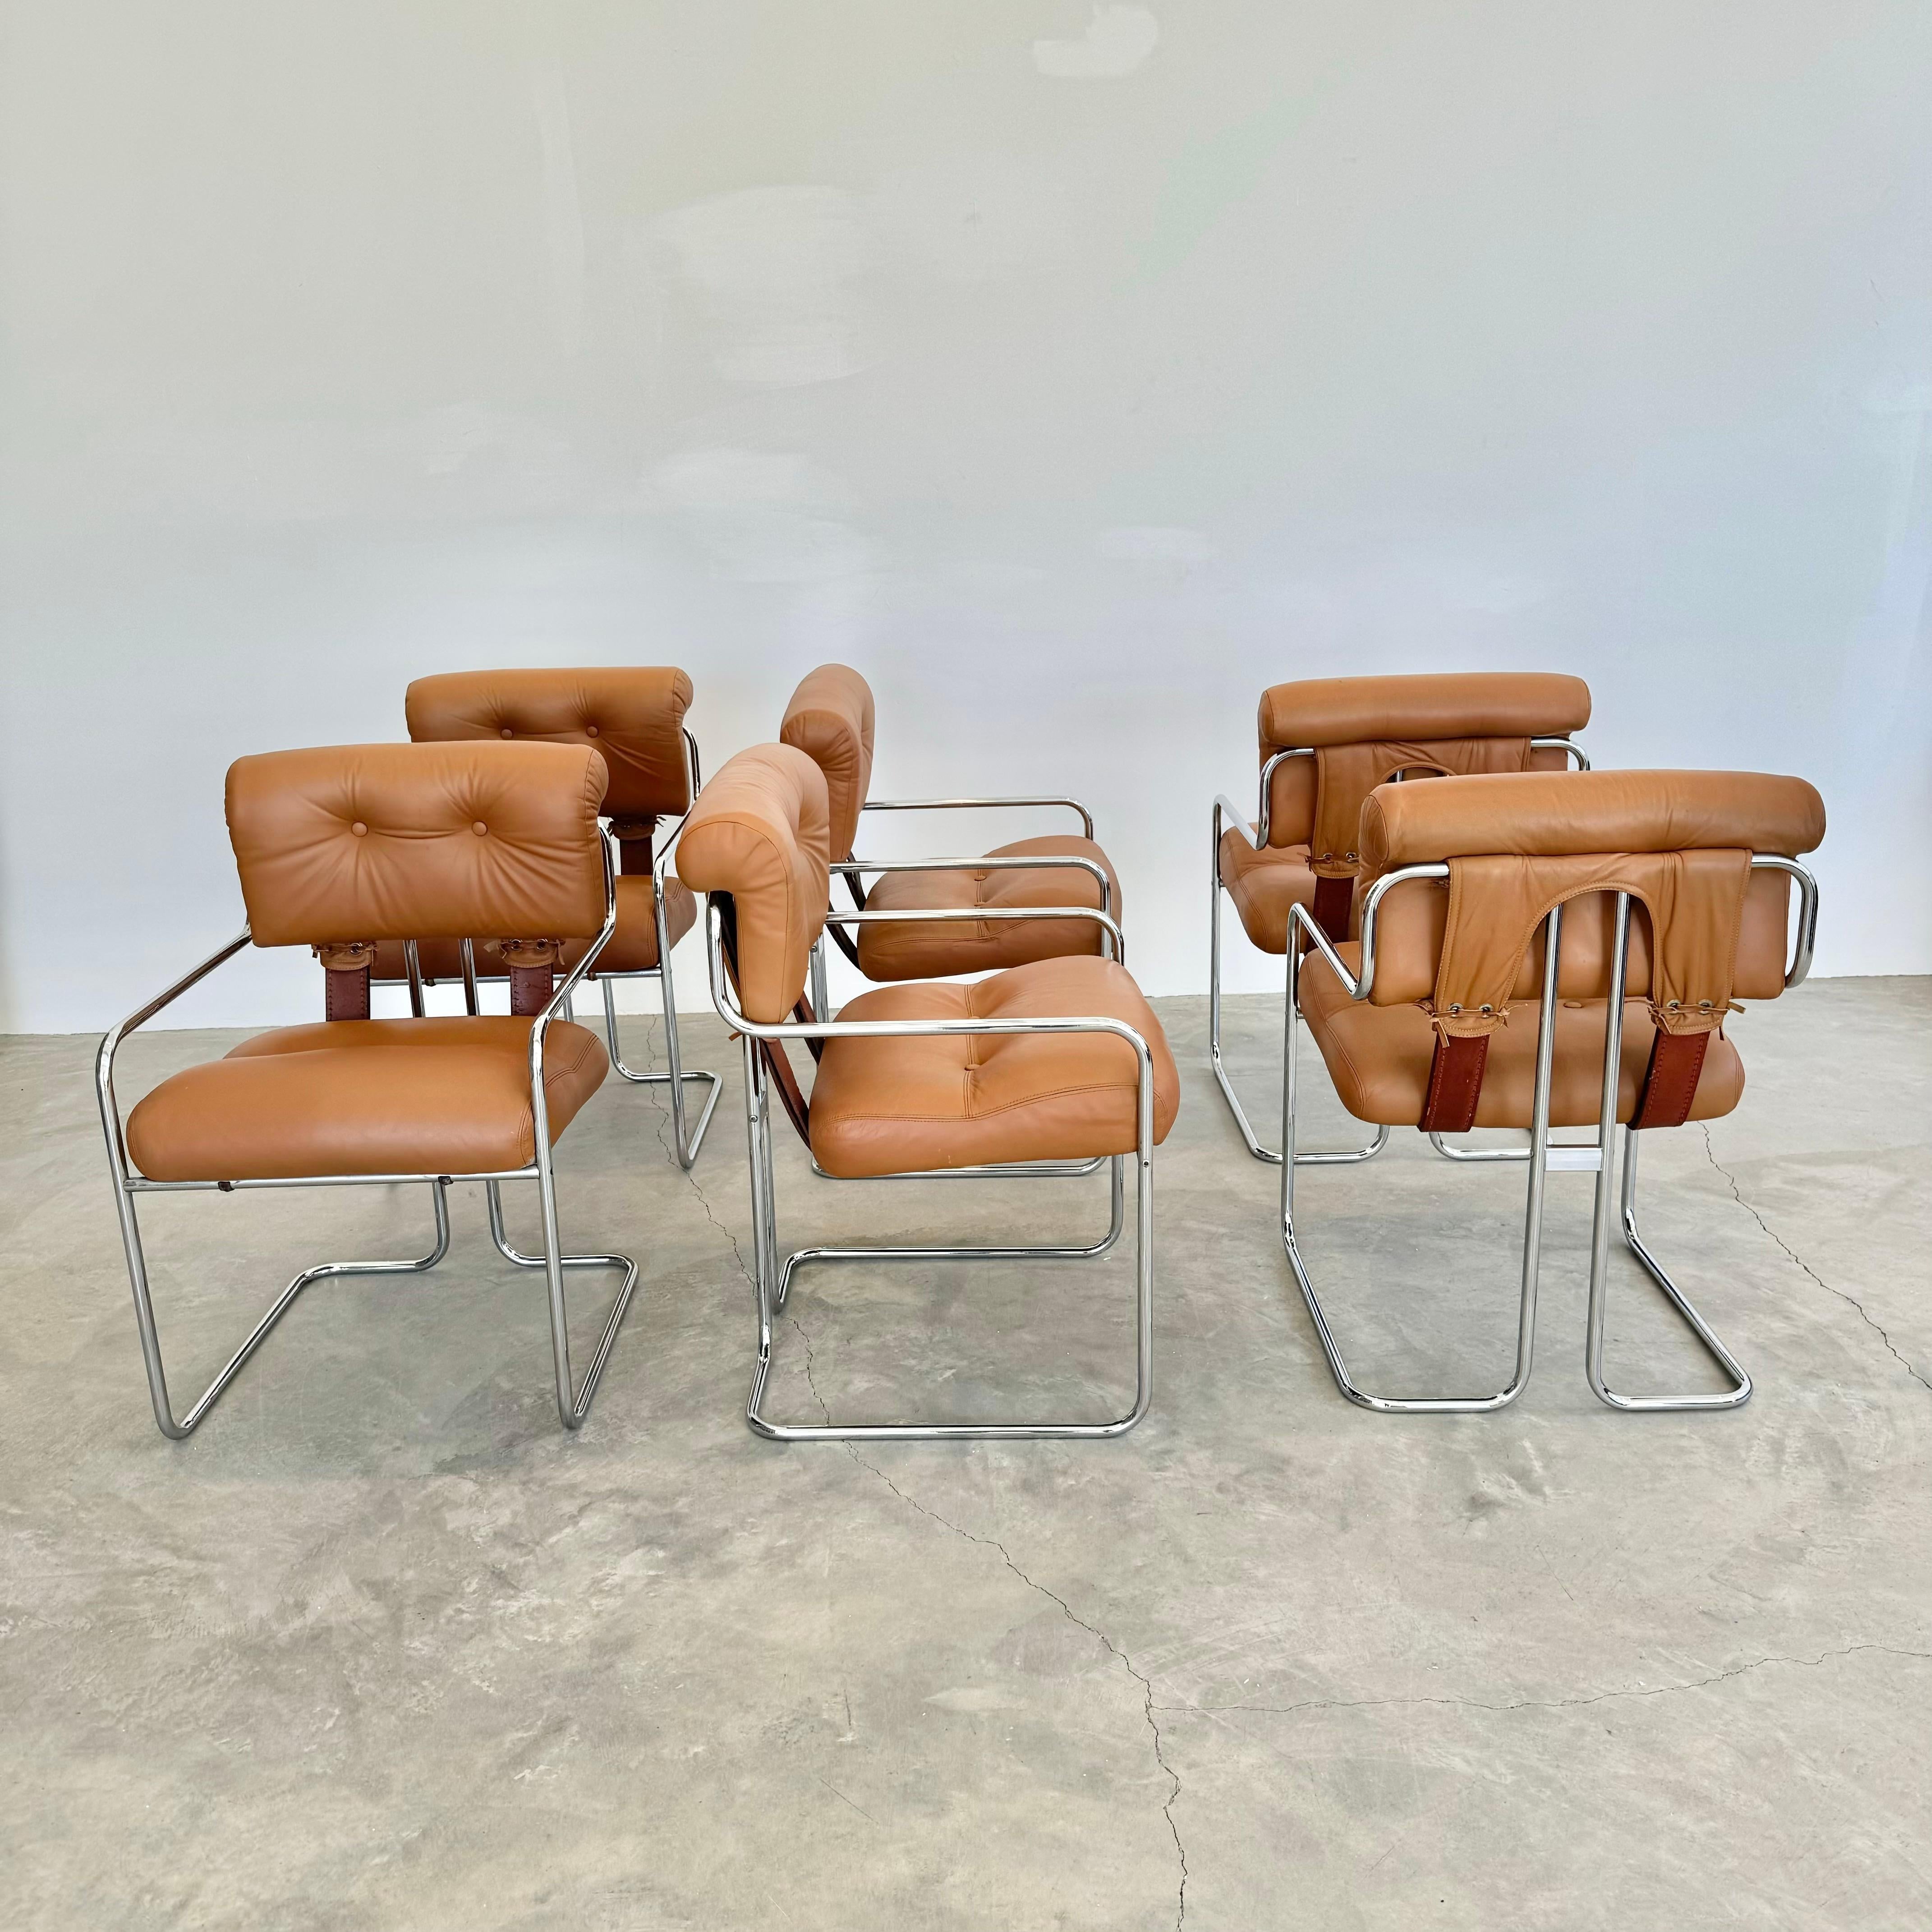 Set of 6 'Tucroma' Chairs in Tan by Guido Faleschini, 1970s Italy For Sale 9